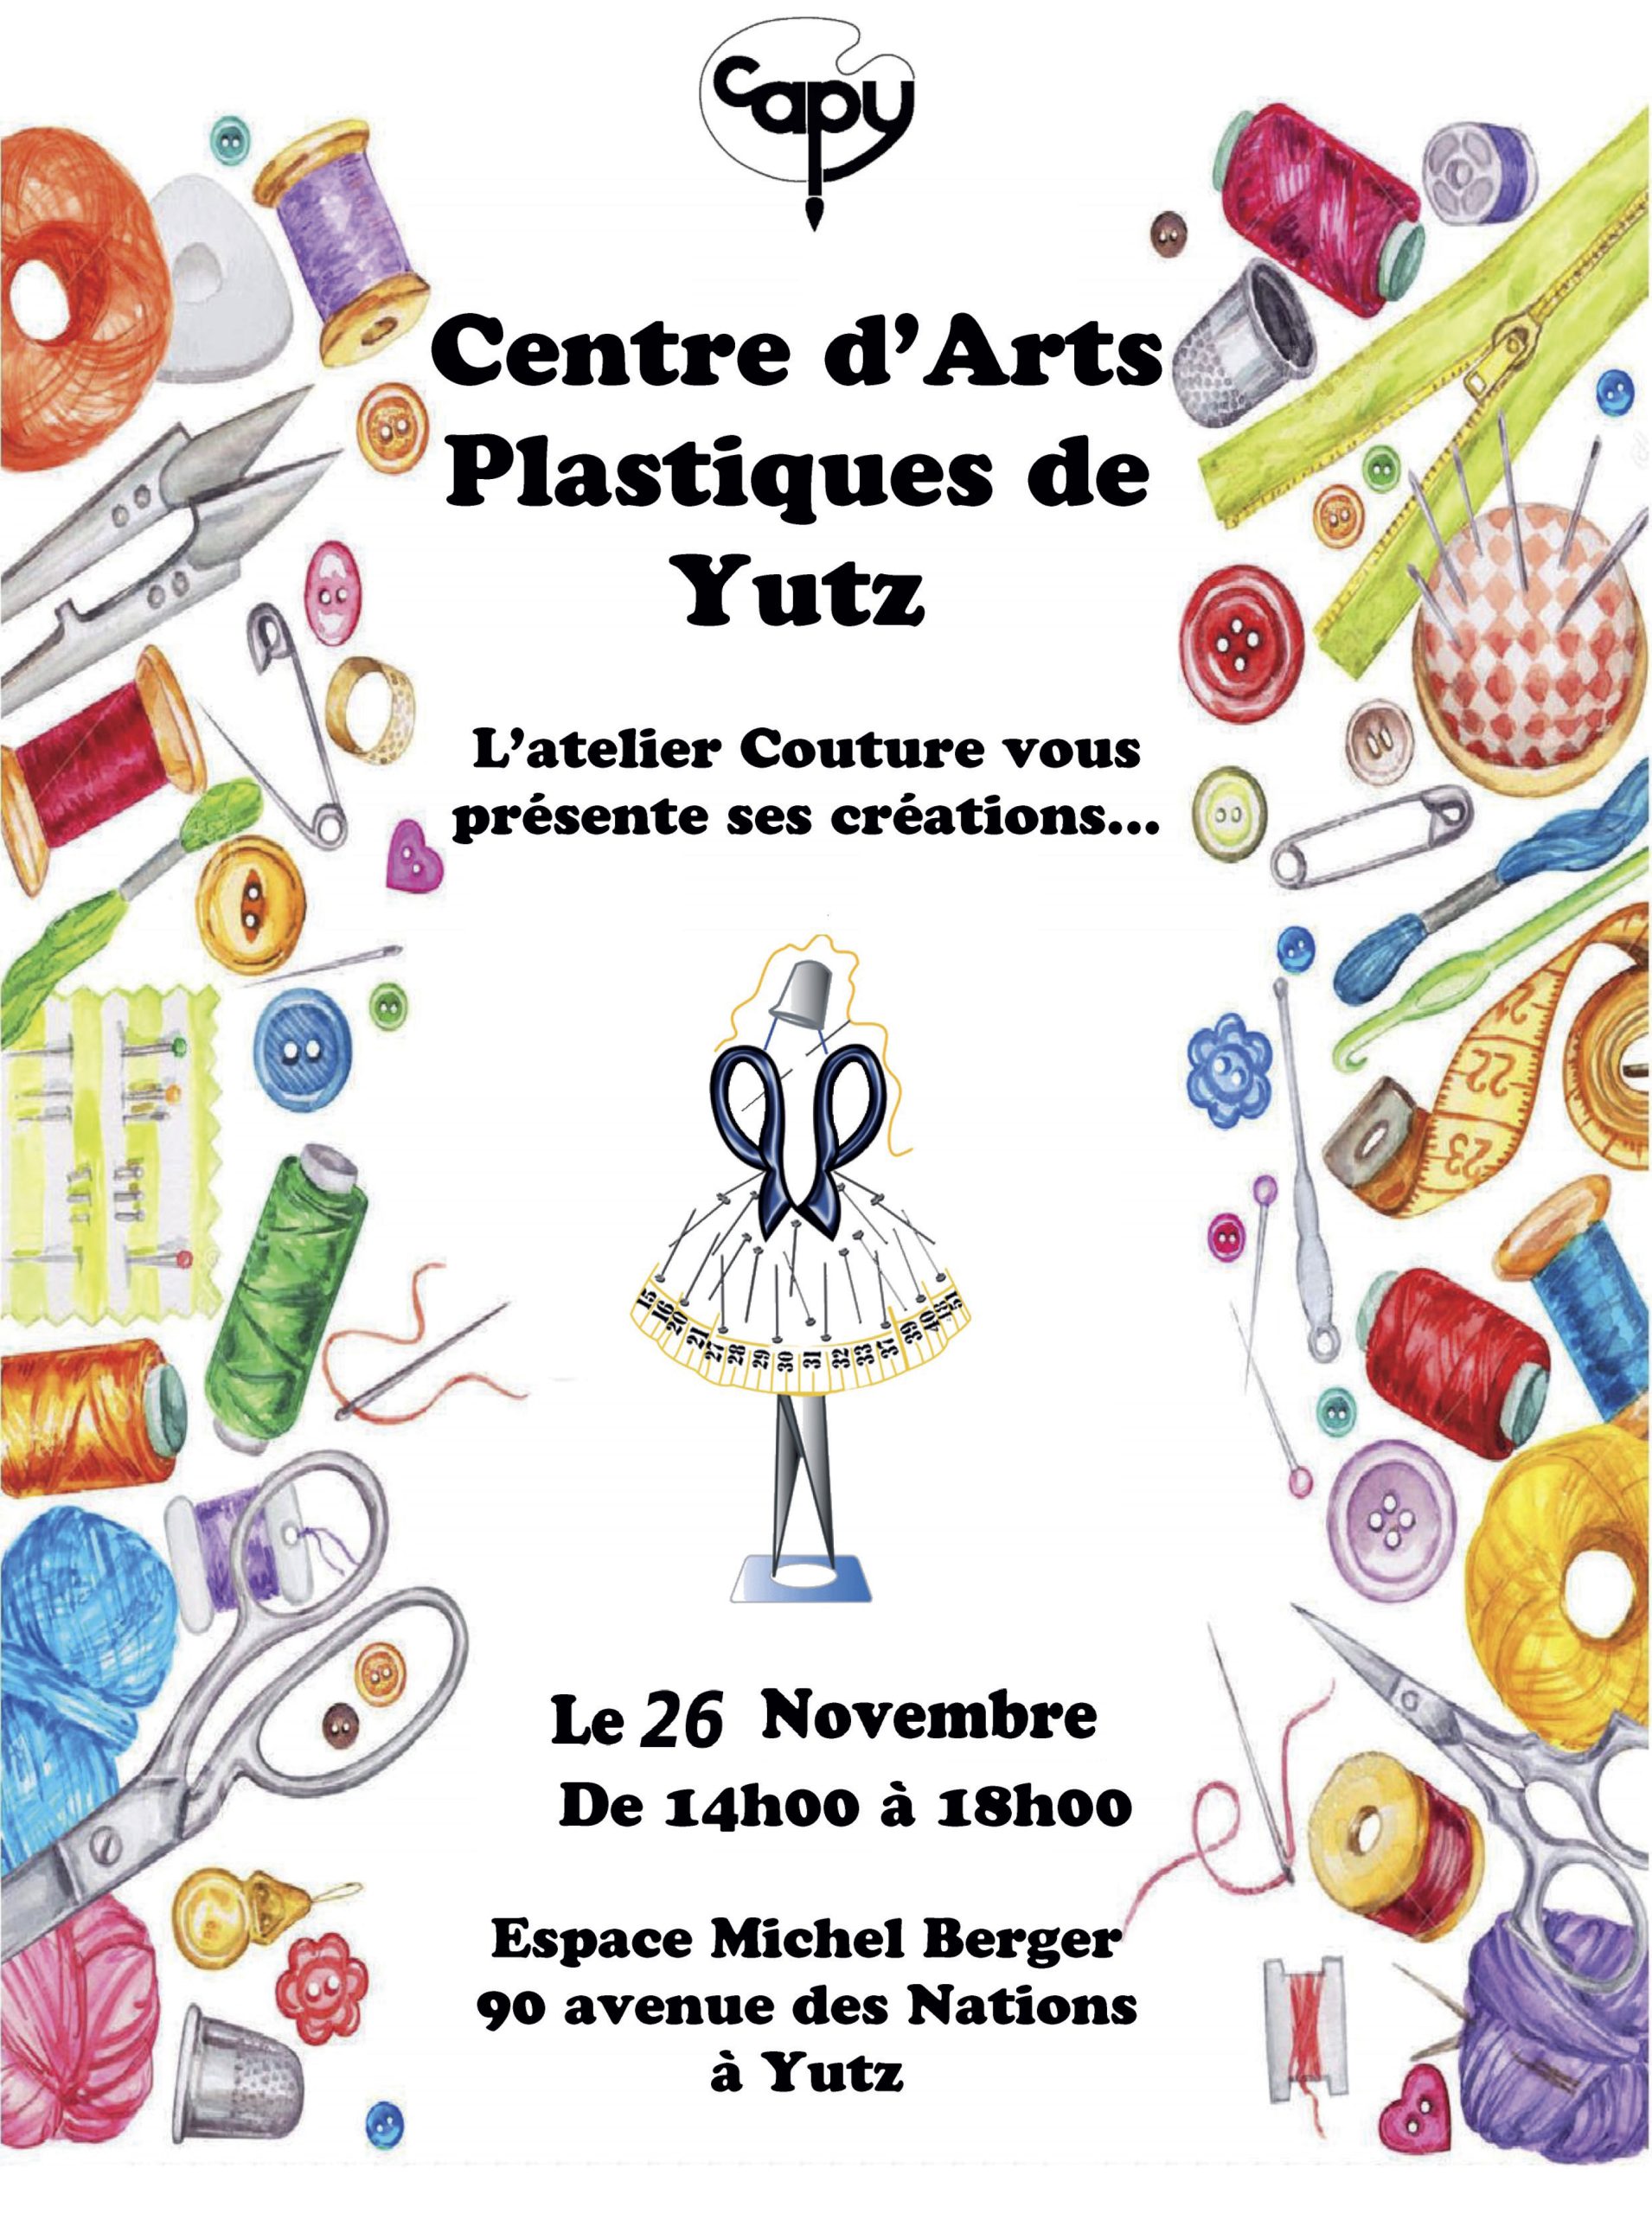 Exhibition of the CAPY sewing workshop